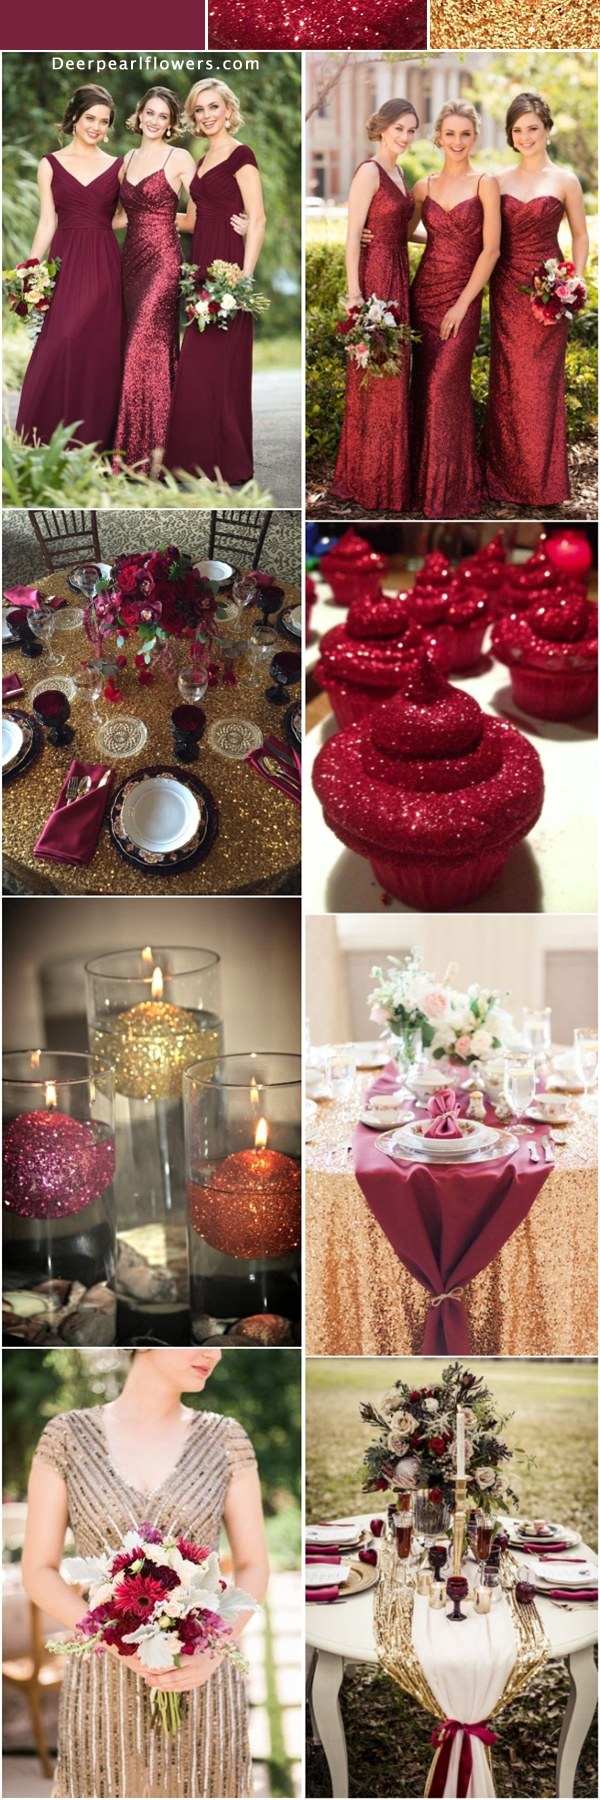 Burgundy and gold glitter wedding color ideas